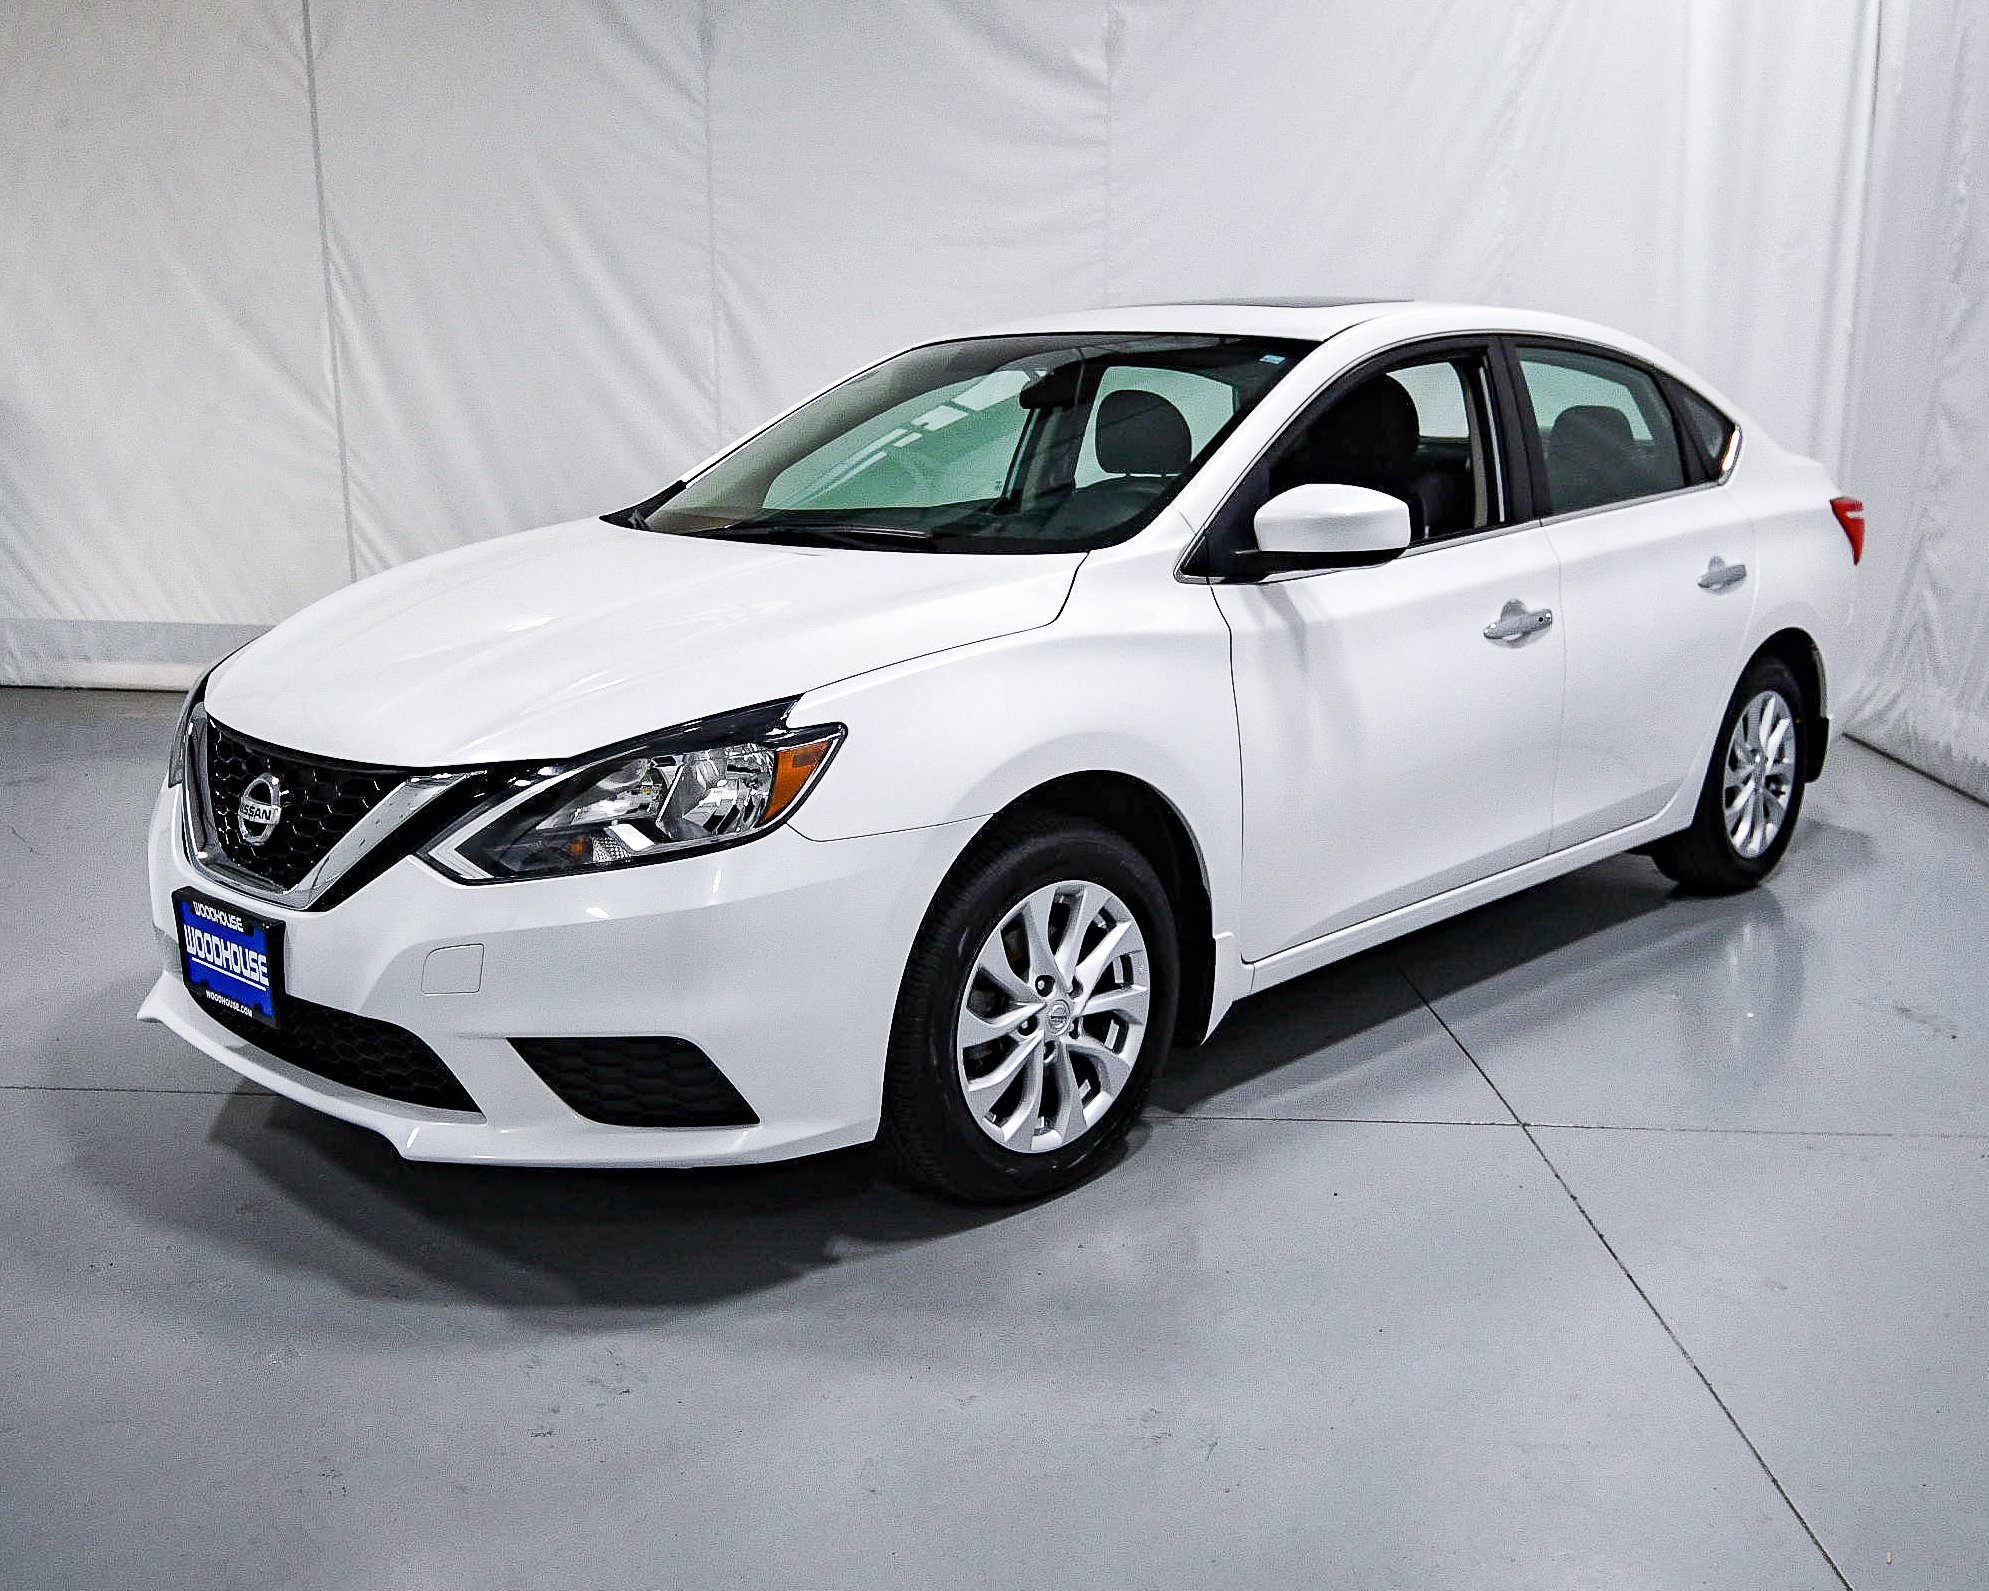 PreOwned 2017 Nissan Sentra SV FWD 4dr Car